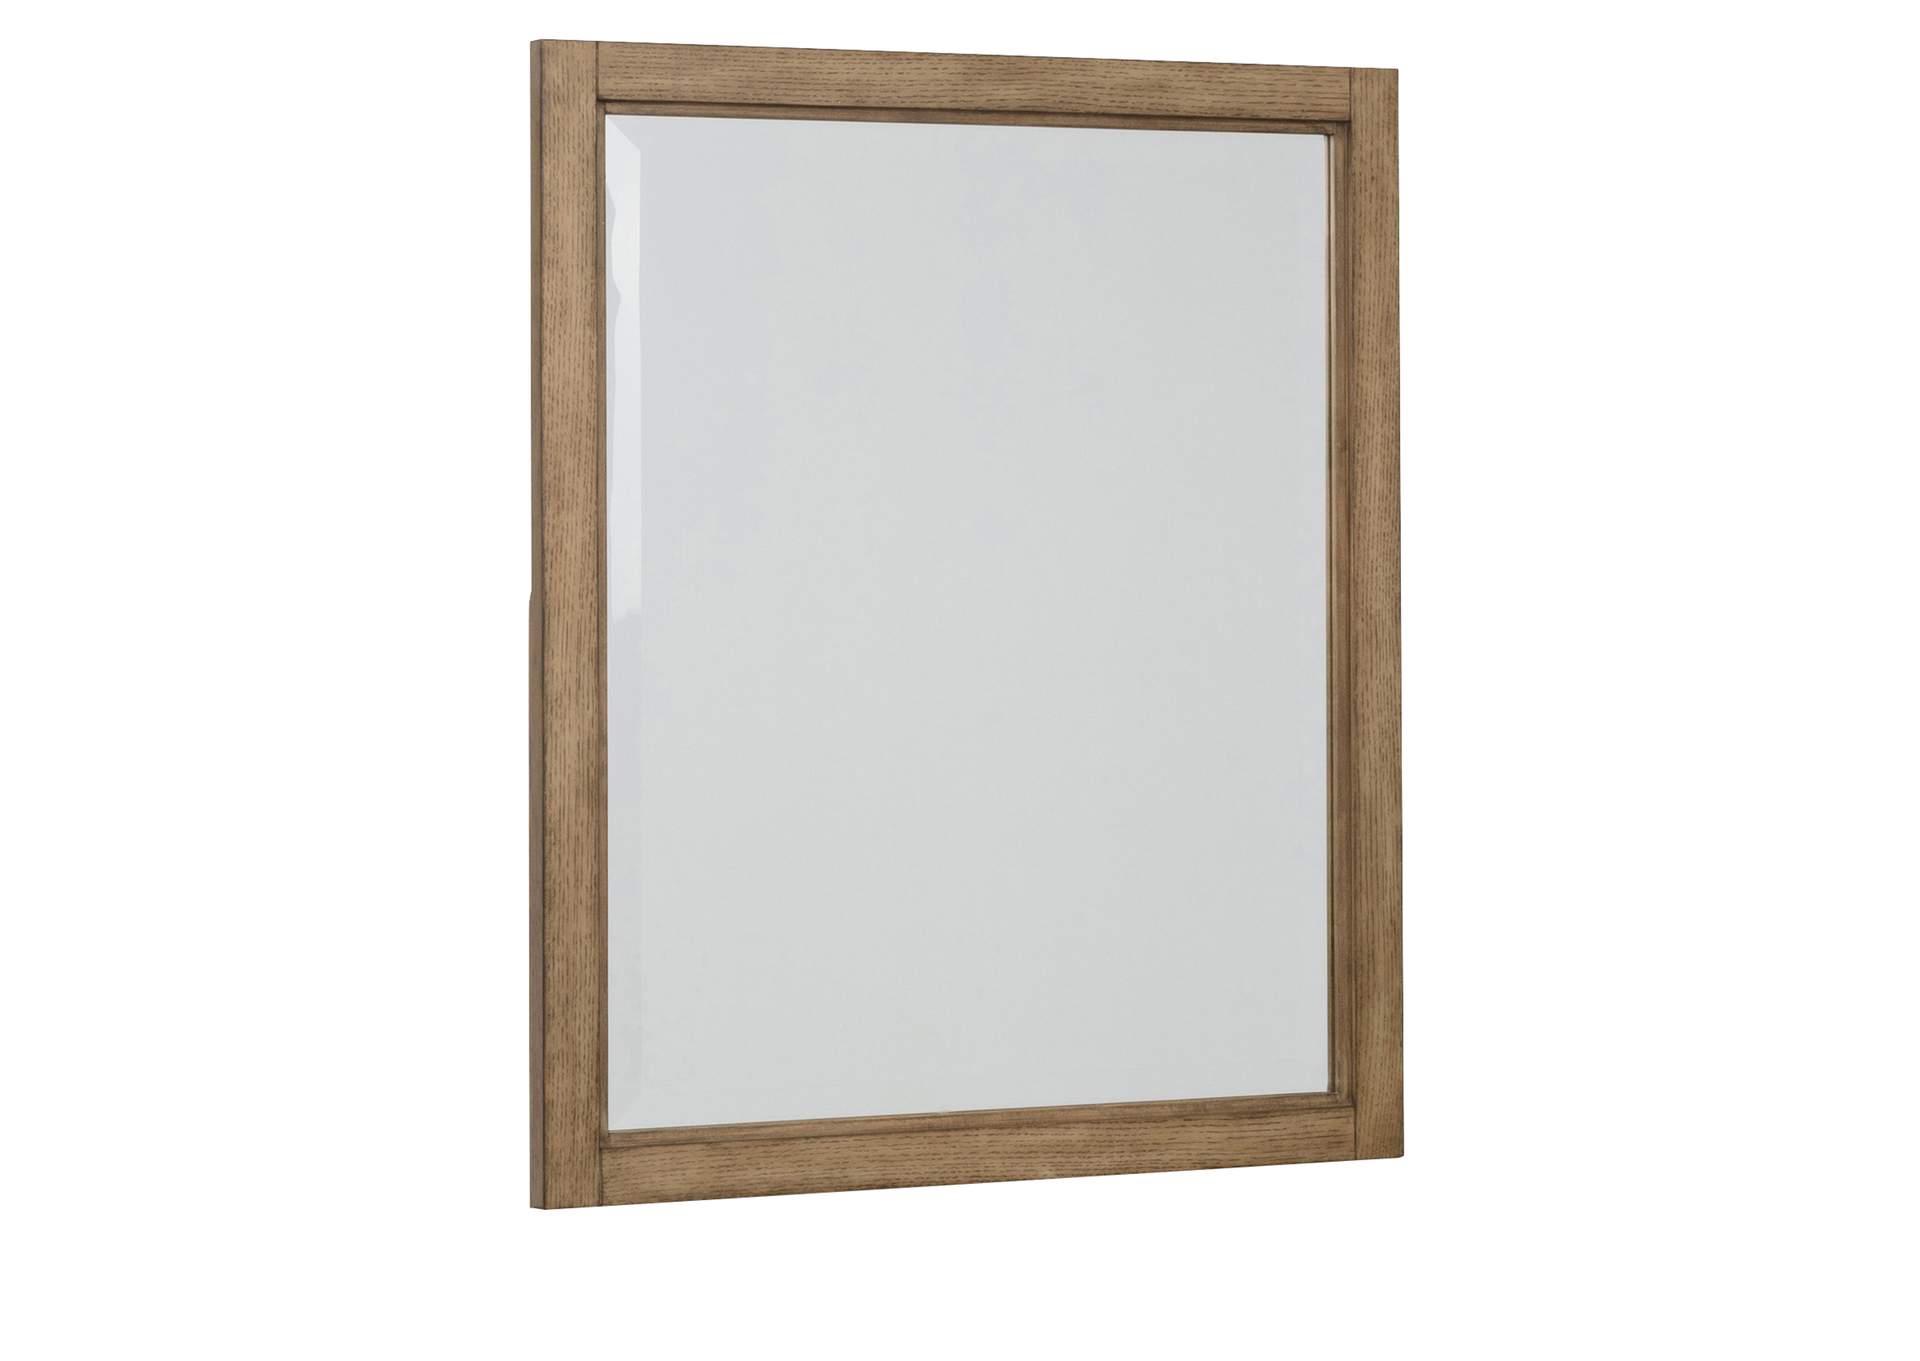 Montecito Mirror by Homestyles,Homestyles